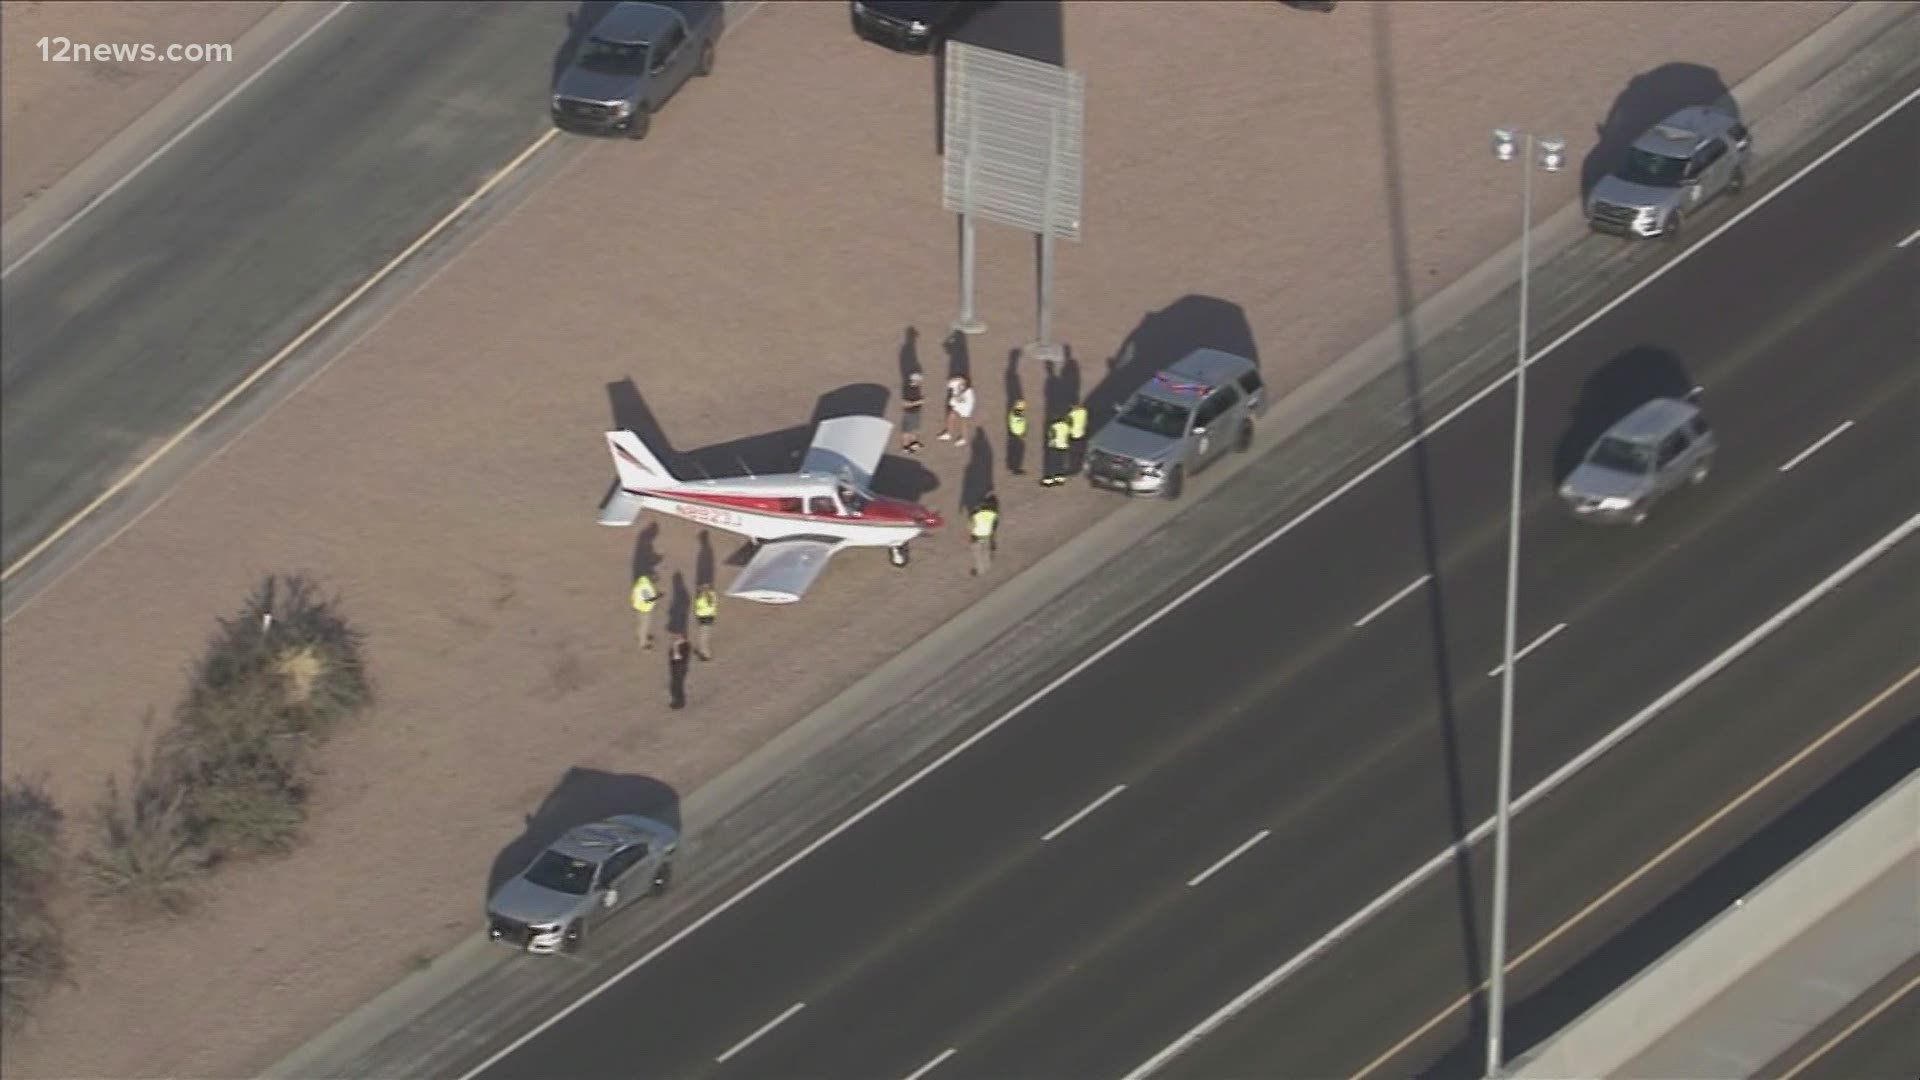 Authorities have not said what caused the plane to land on the roadway near South Higley Road.